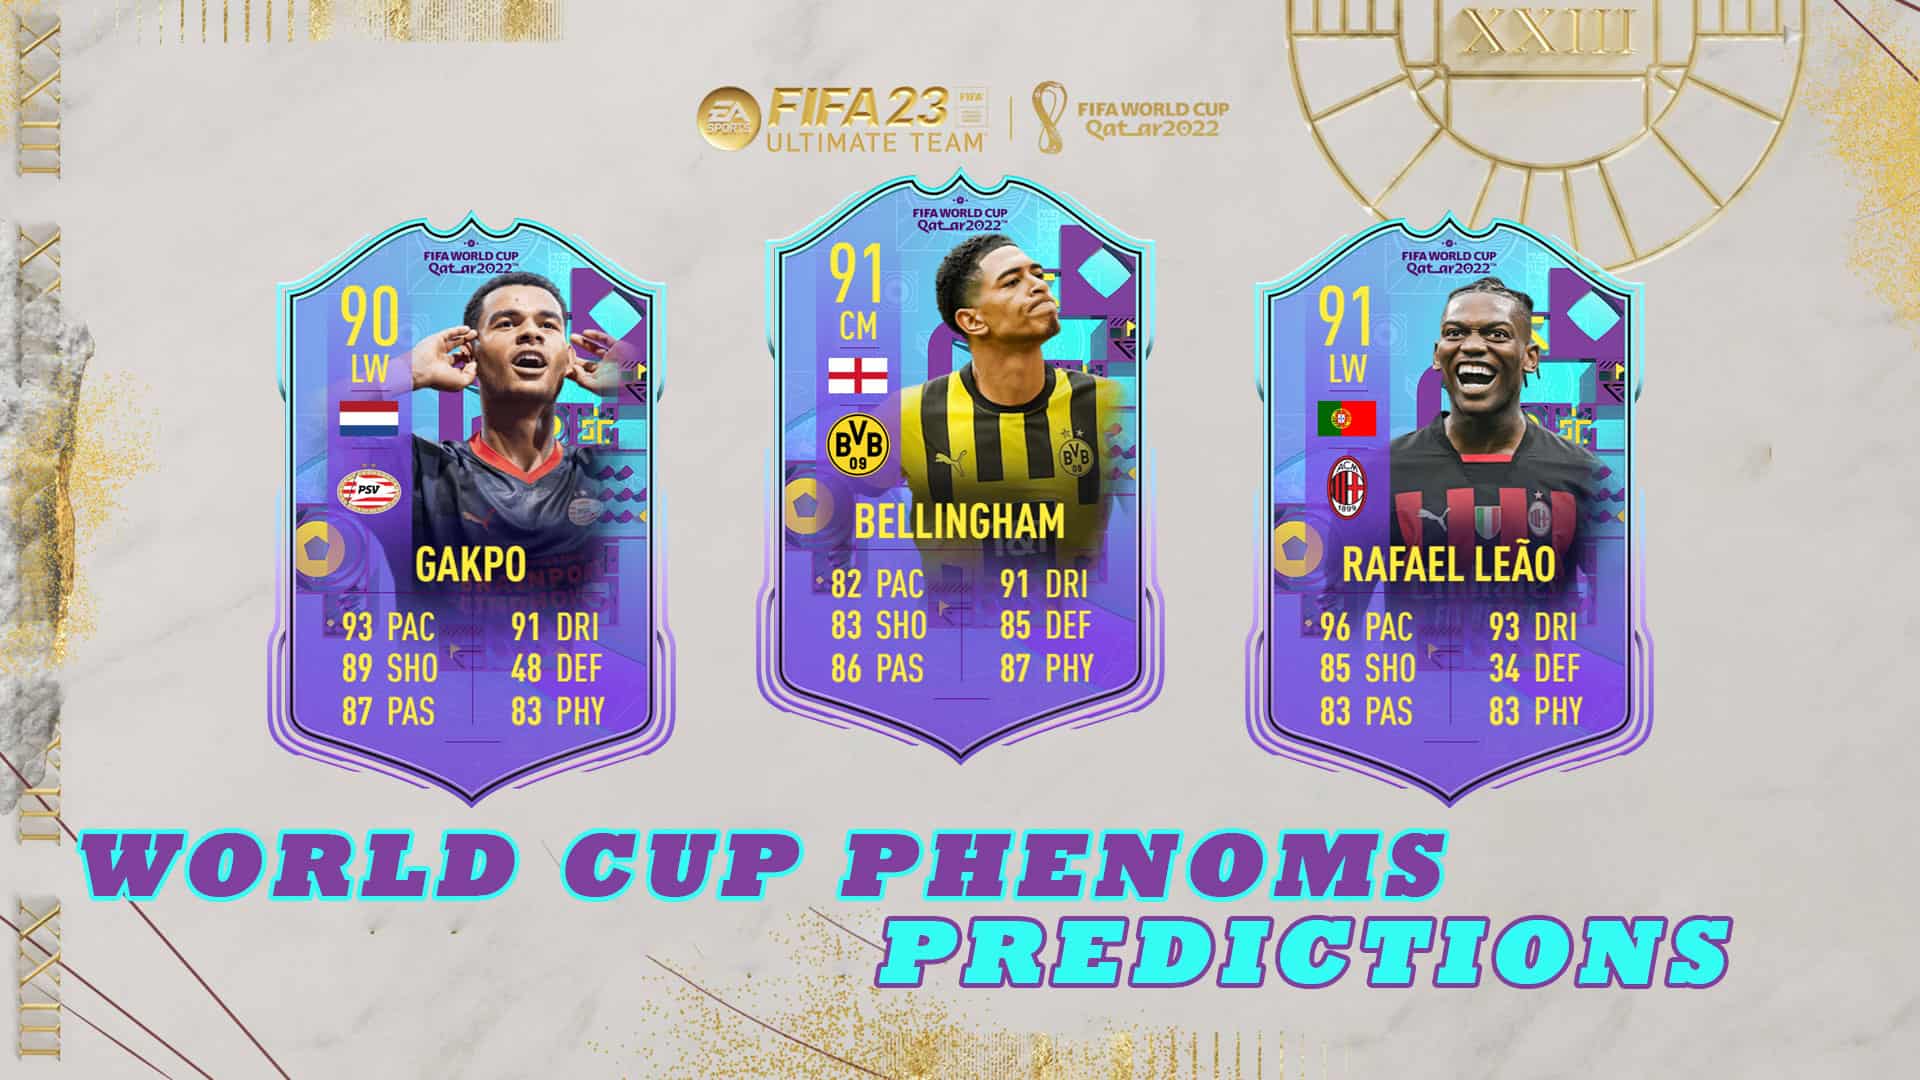 FIFA 23 World Cup Phenoms Predictions with Bellingham, Leao and Gakpo